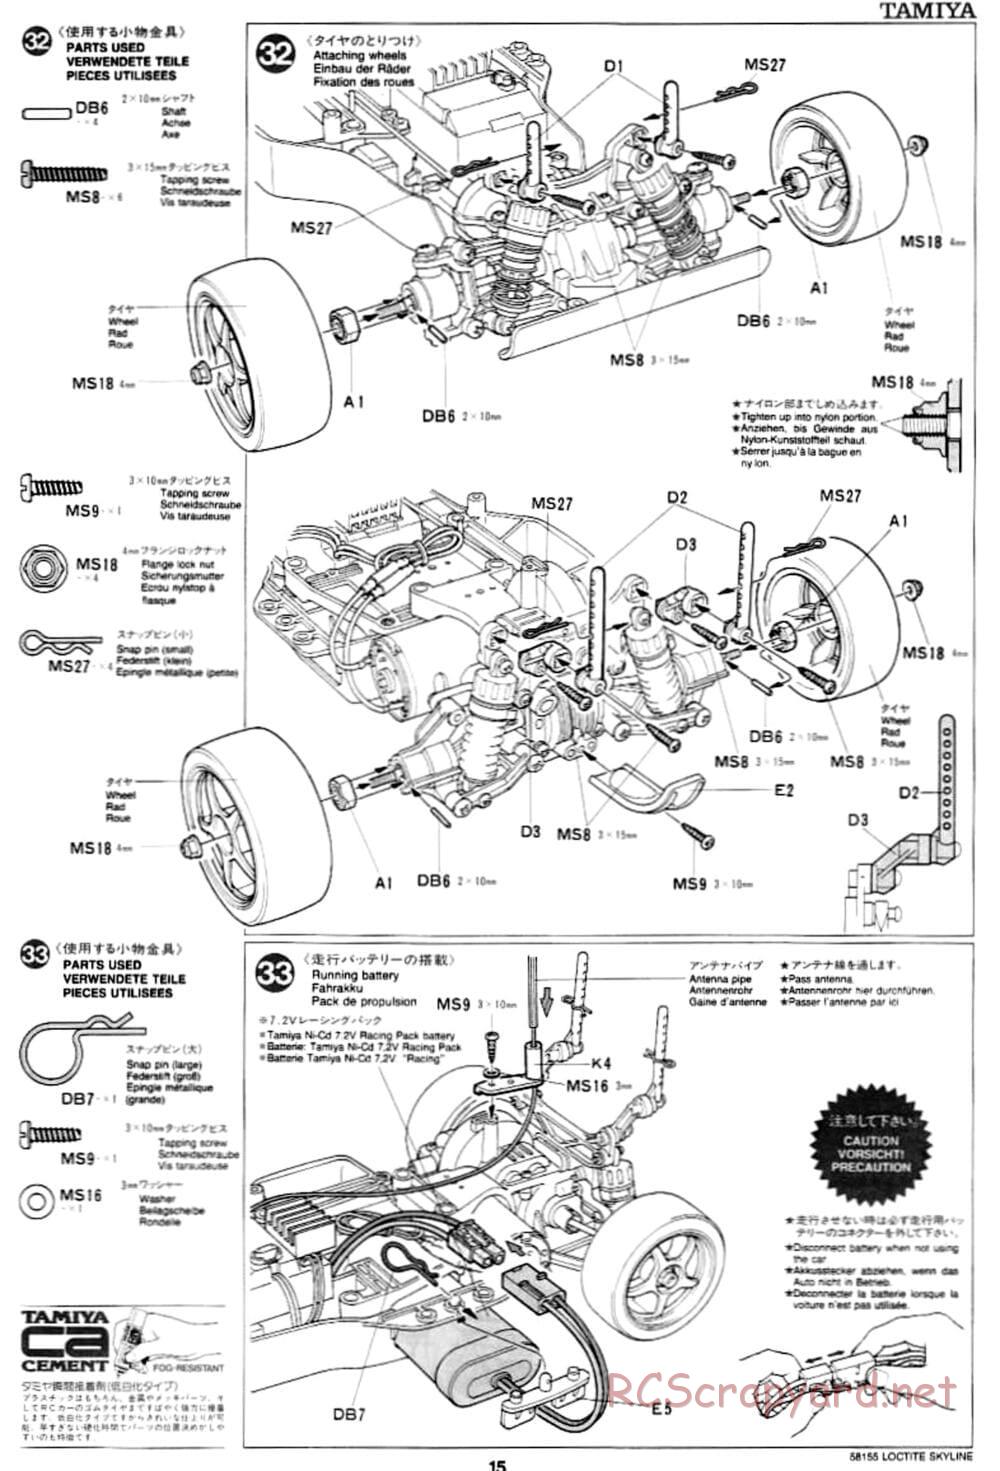 Tamiya - Loctite Nissan Skyline GT-R N1 - TA-02 Chassis - Manual - Page 15